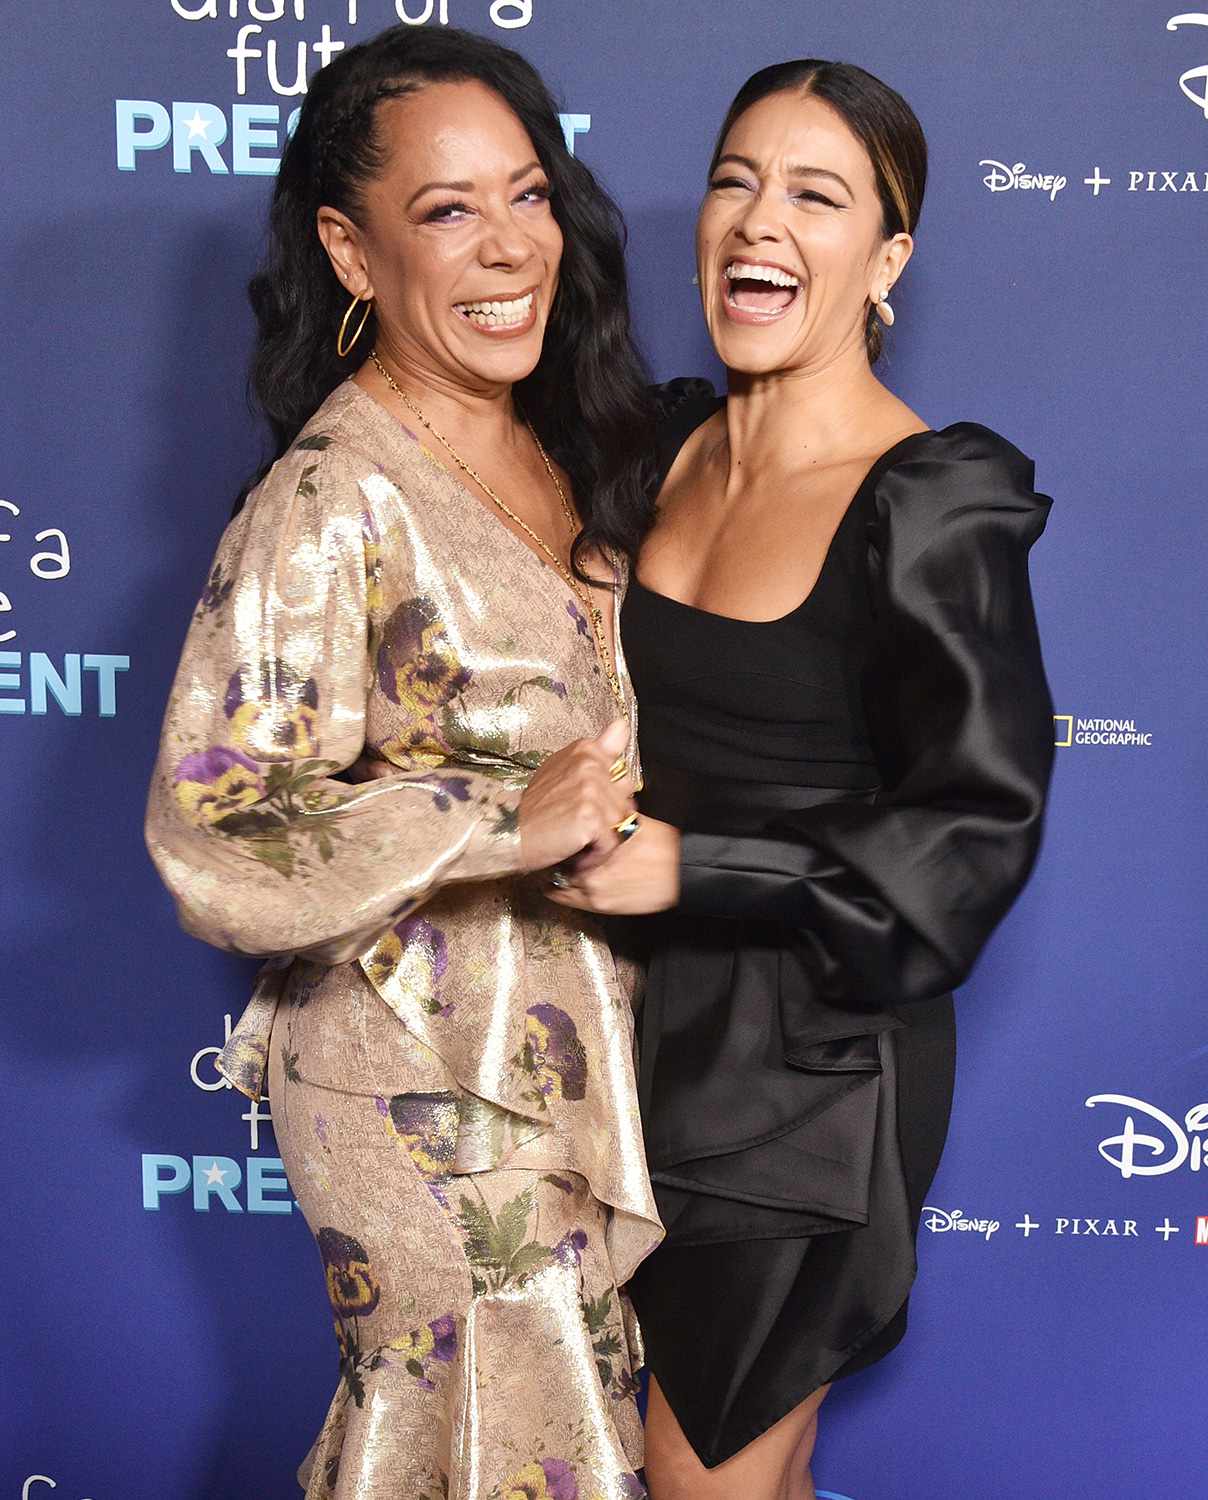 Selenis Leyva and Gina Rodriguez attend the Premiere Of Disney +'s "Diary Of A Future President" at ArcLight Cinemas on January 14, 2020 in Hollywood, California